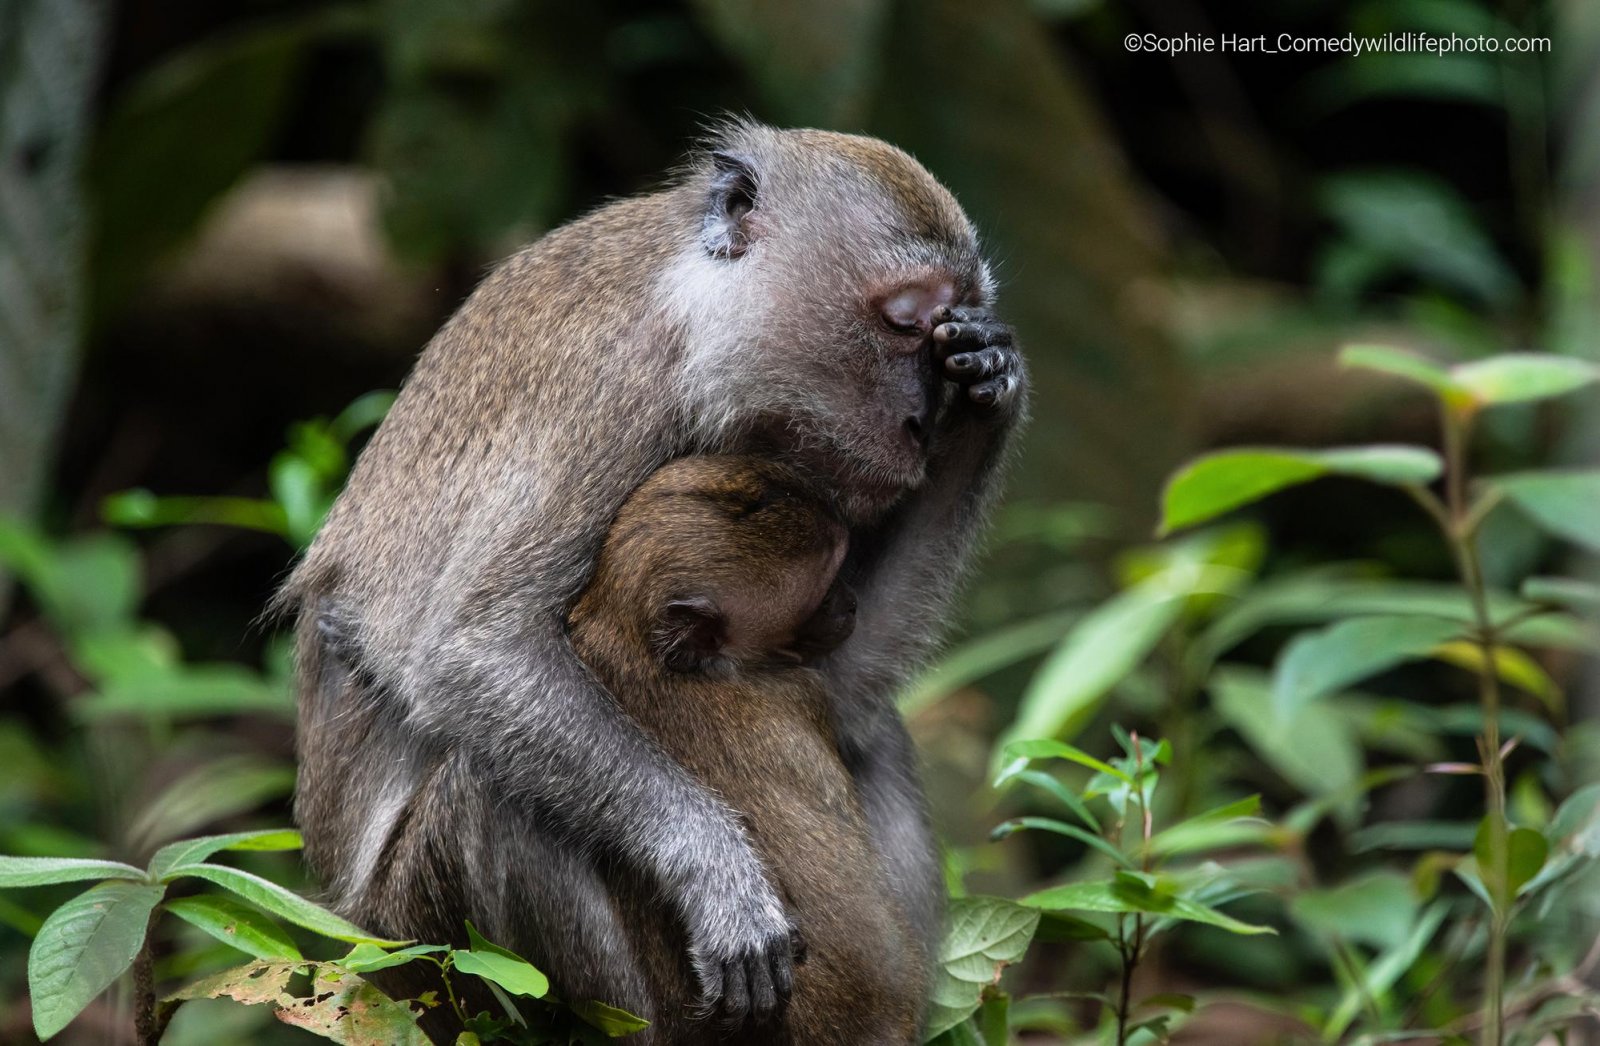 A baby long-tailed macaque clings on to its weary mother in the jungle.